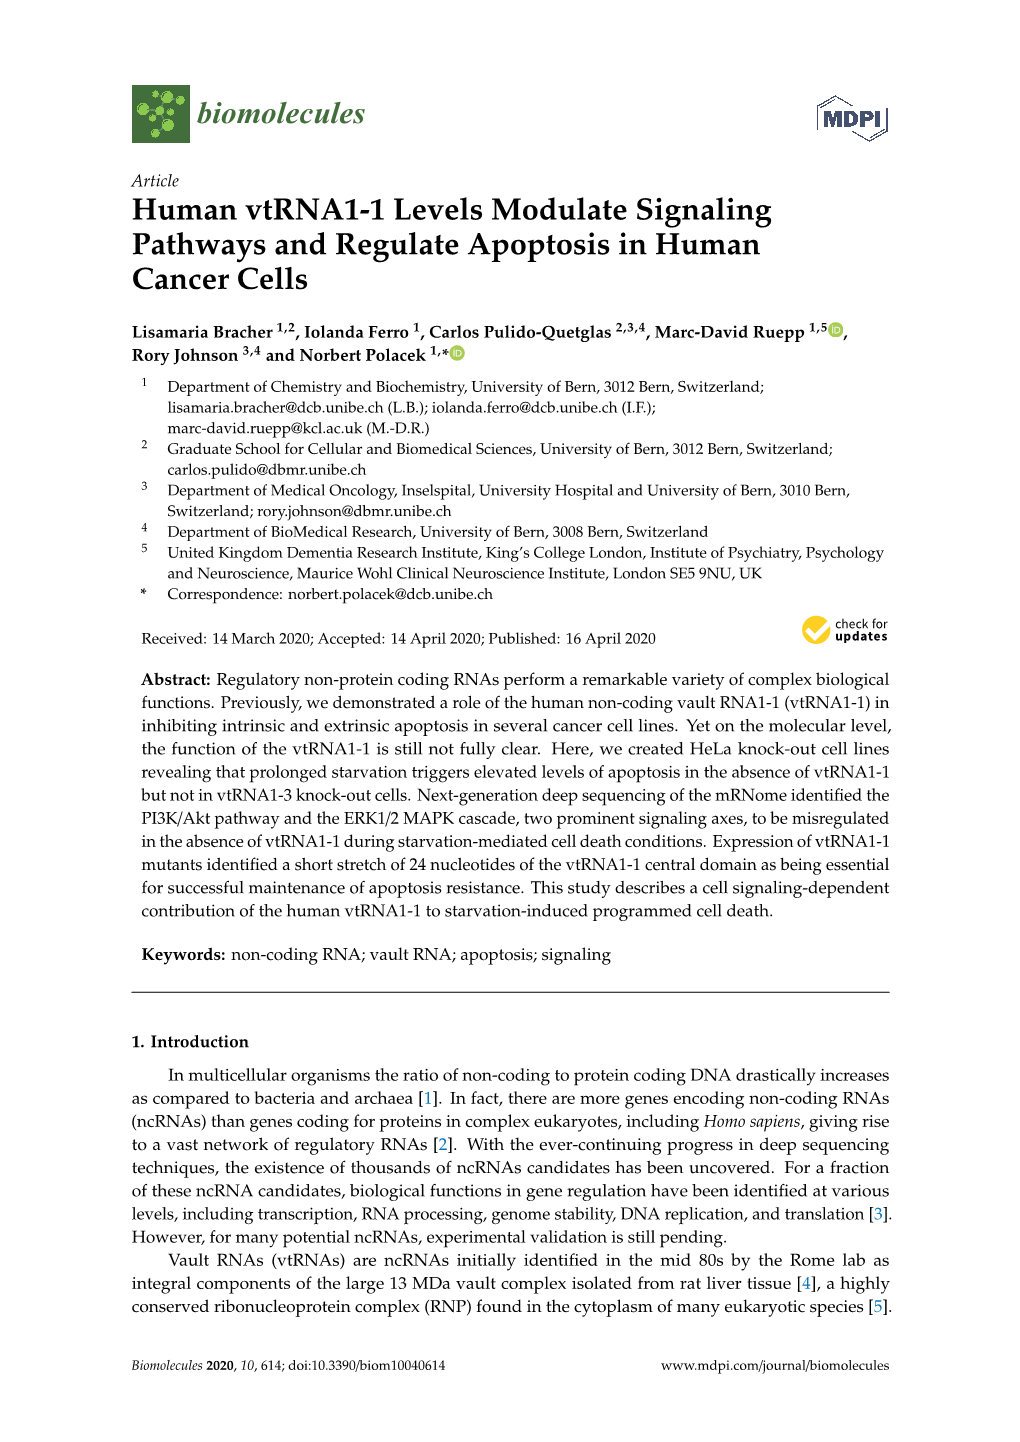 Human Vtrna1-1 Levels Modulate Signaling Pathways and Regulate Apoptosis in Human Cancer Cells